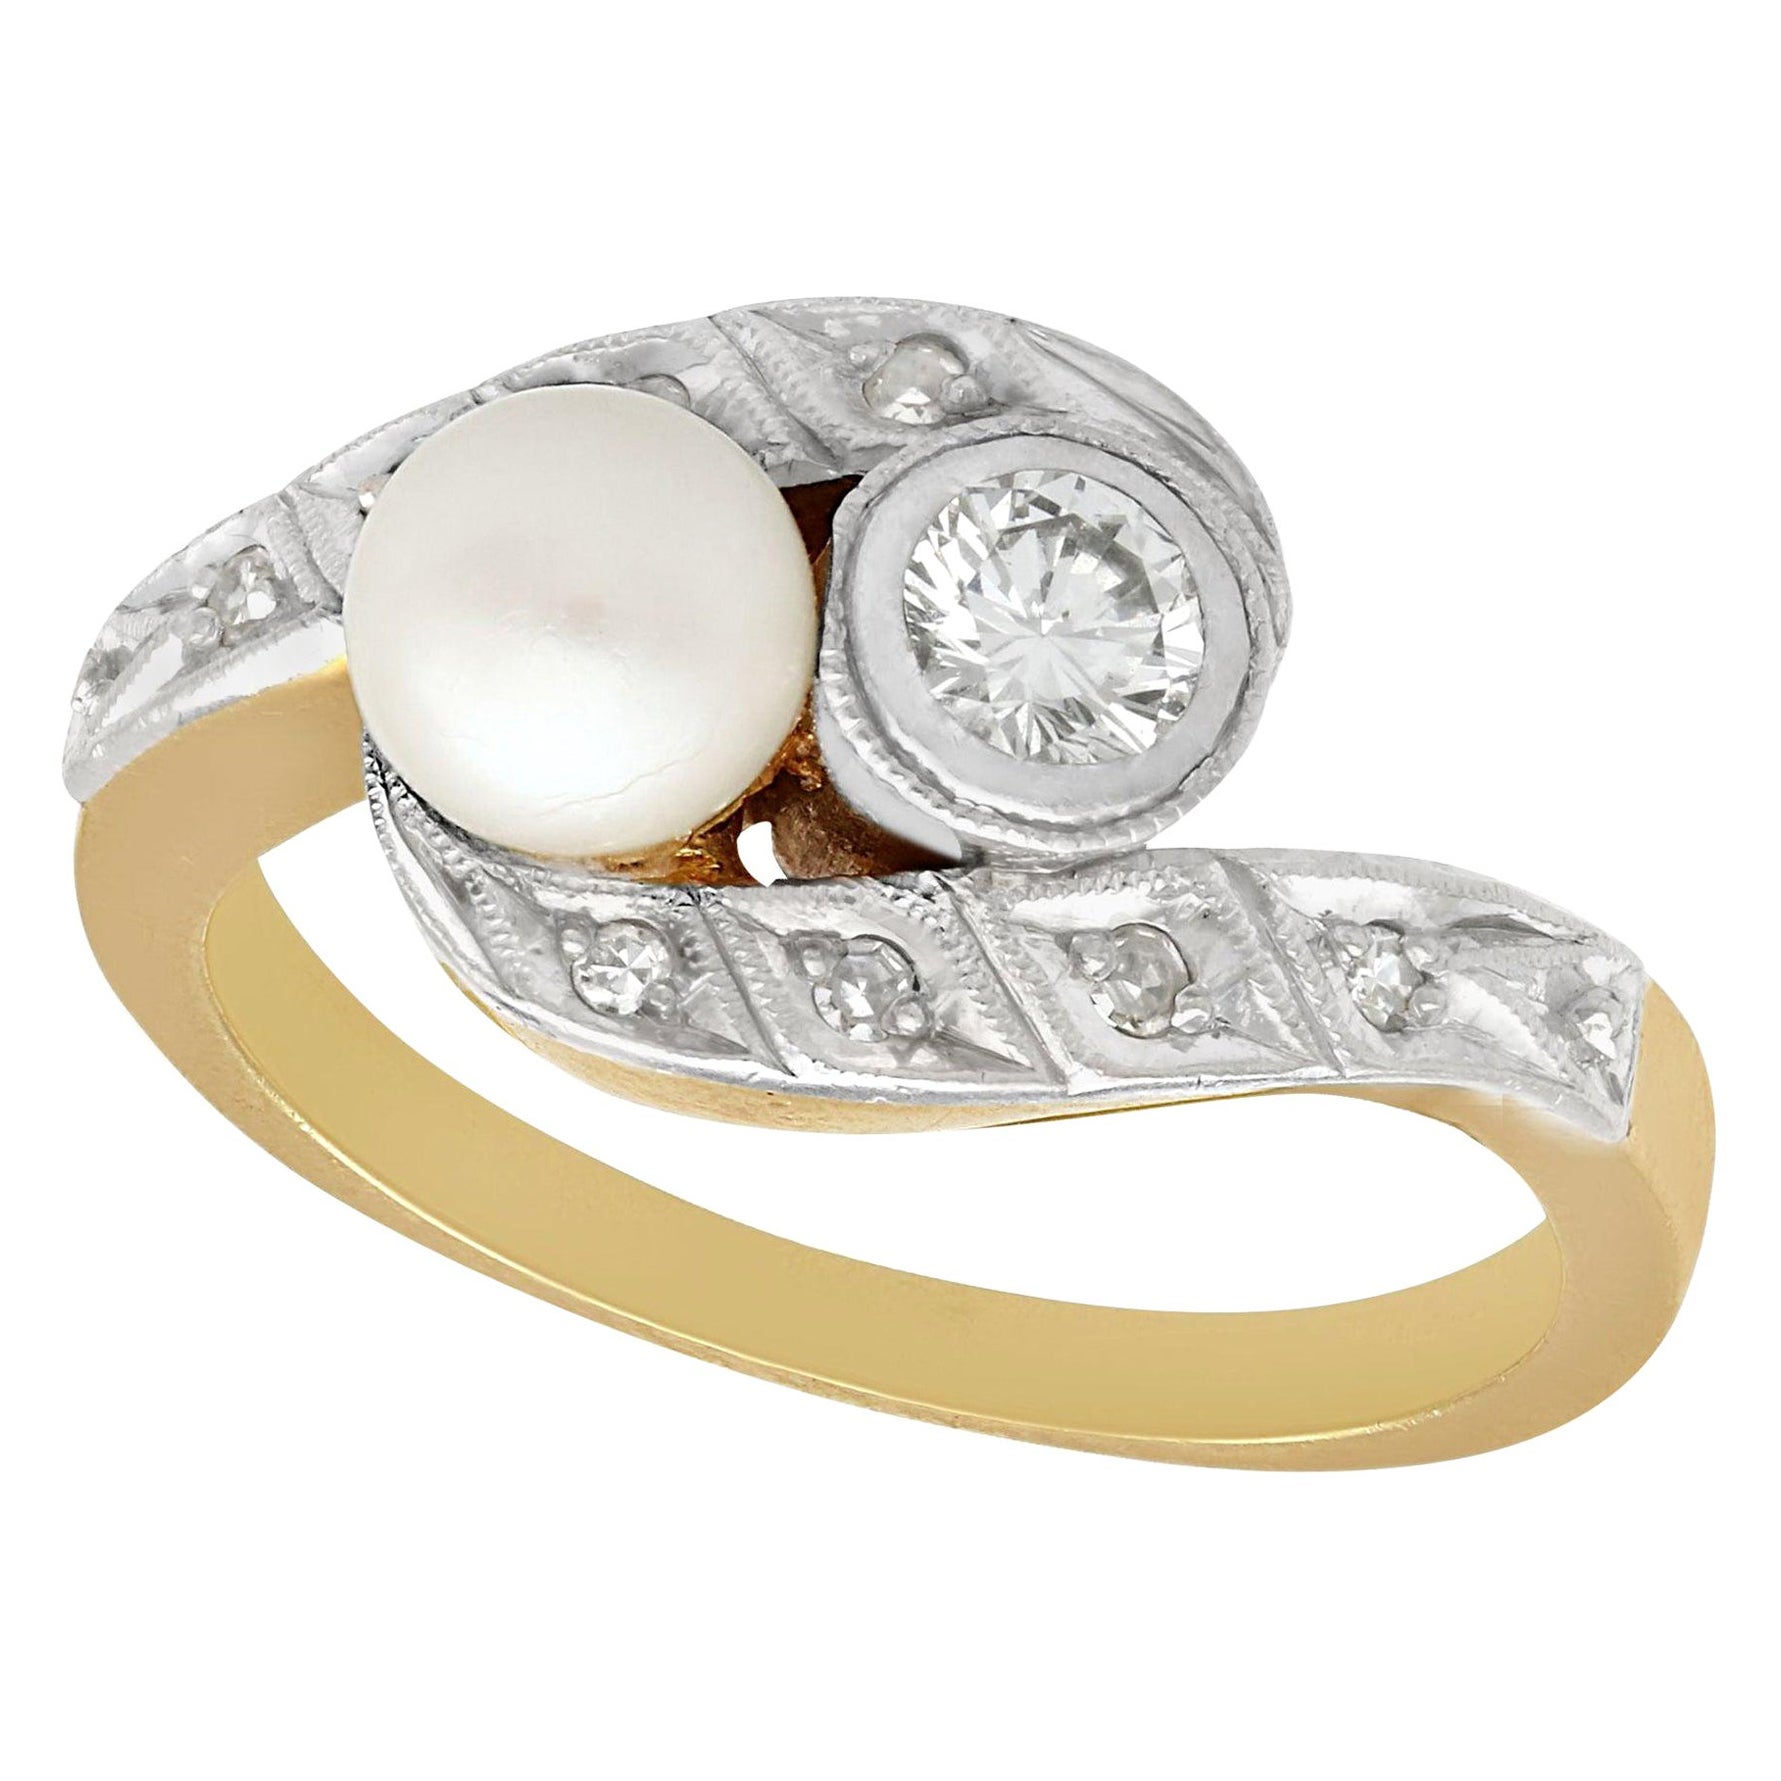 1930s 0.37 Carat Diamond and Pearl 14K Yellow Gold Twist Ring For Sale